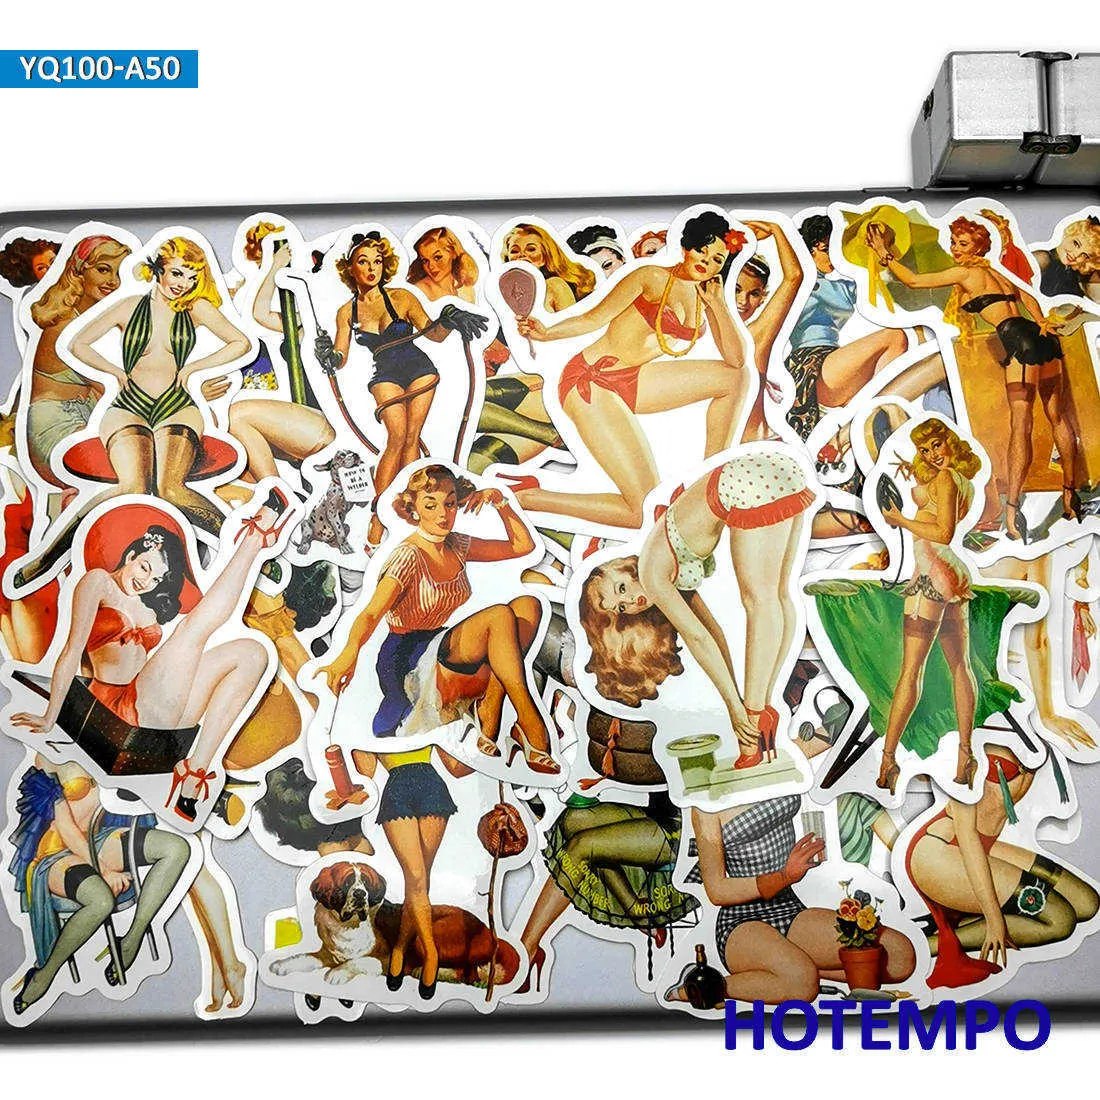 Sexy Beauty Retro Pretty Staint Stinks Lady Girl Telefone Laptop Car Stickers Pack For DIY Bagage Guitar Druger C268E